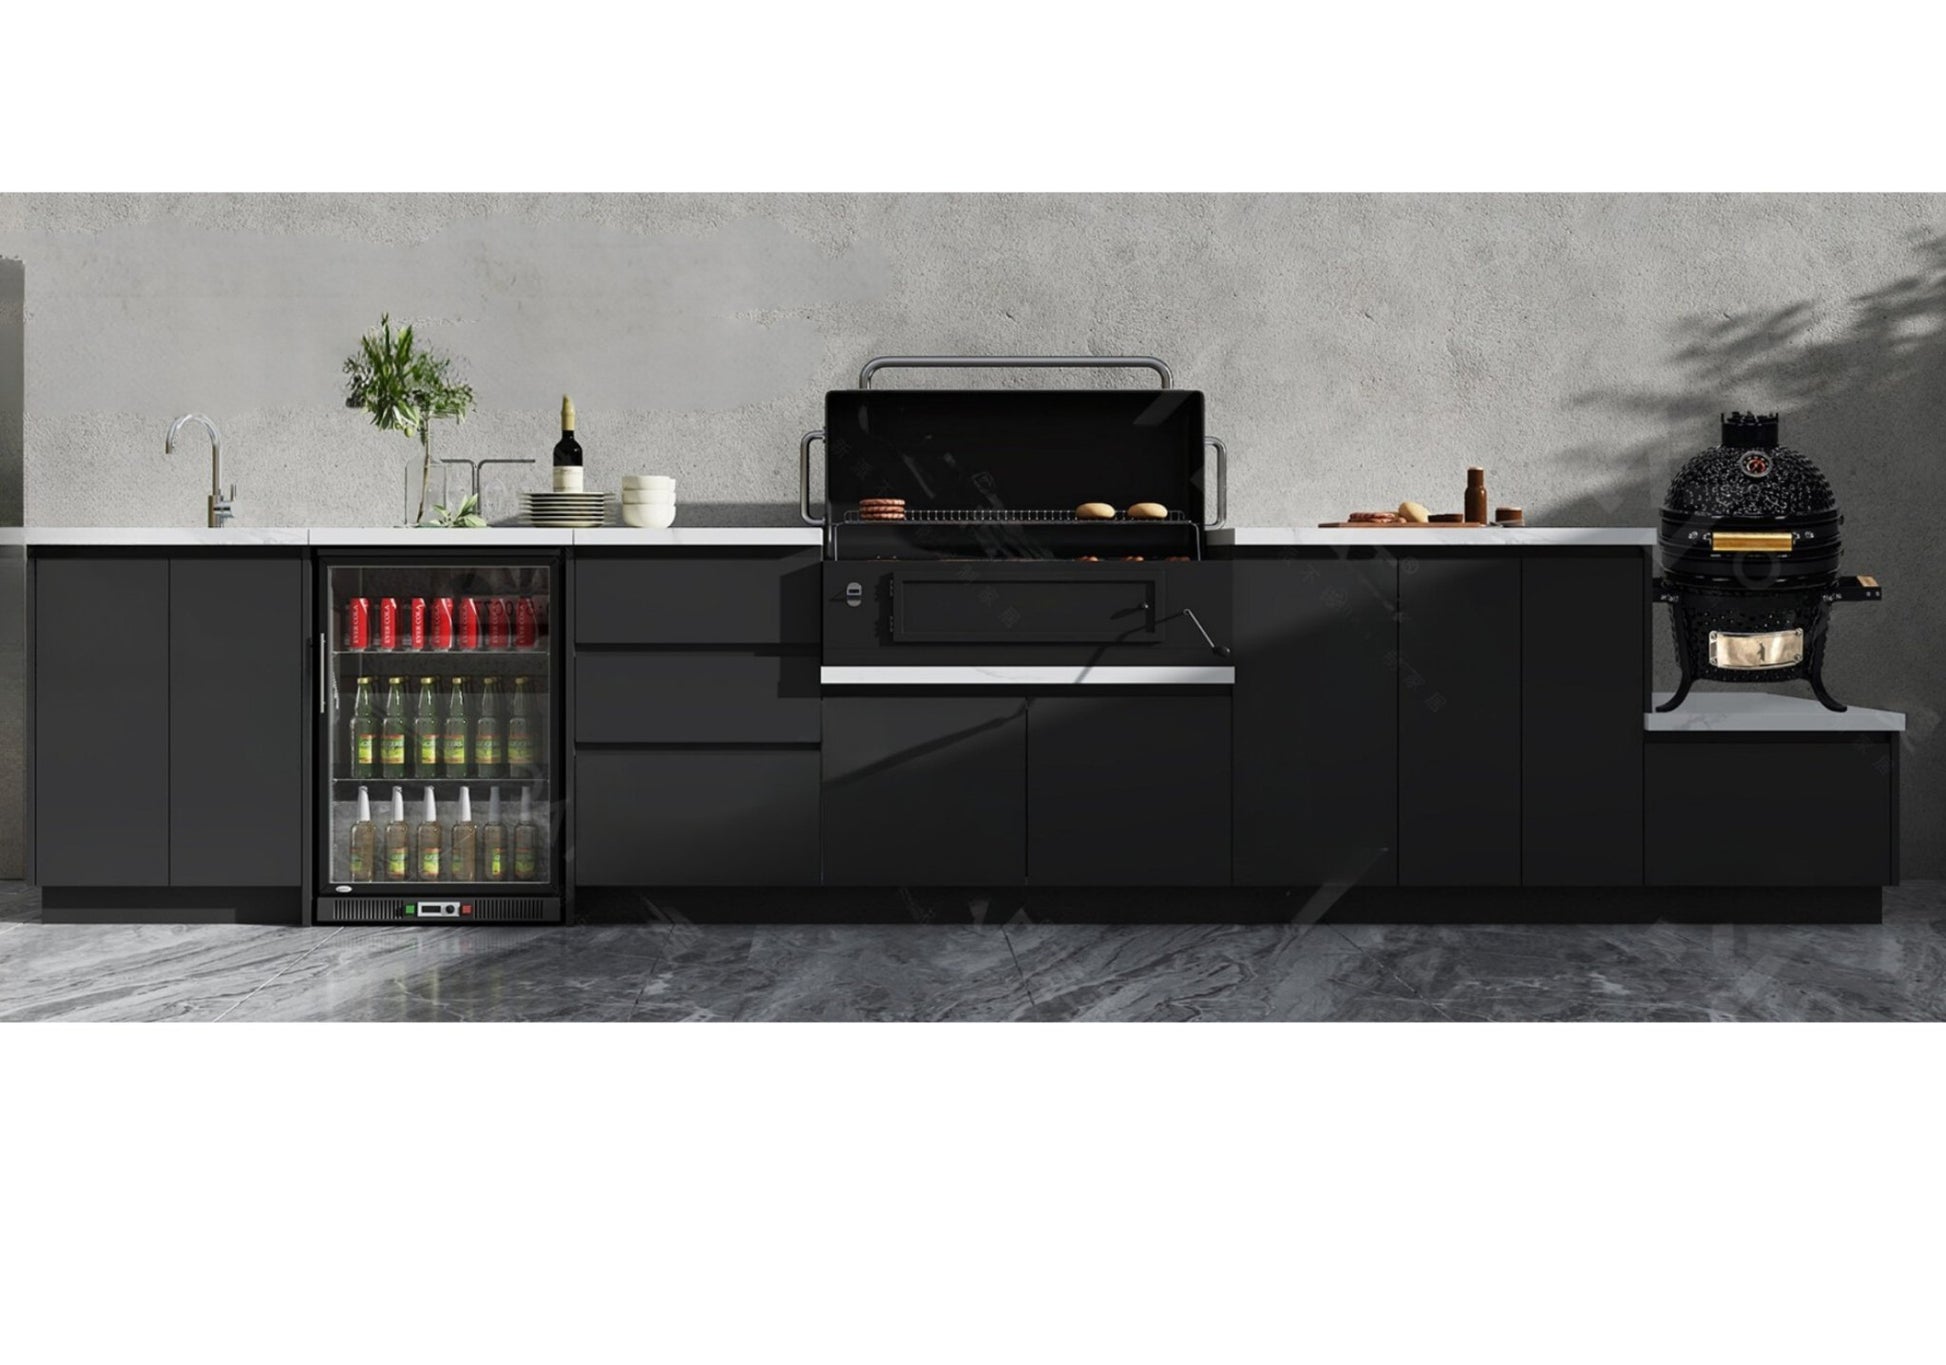 164 inch Black Charcoal Sunzout Designer Series Modular Outdoor Kitchen, 34 in 4 Burner Grill, Sink - Sunzout Outdoor Spaces LLC